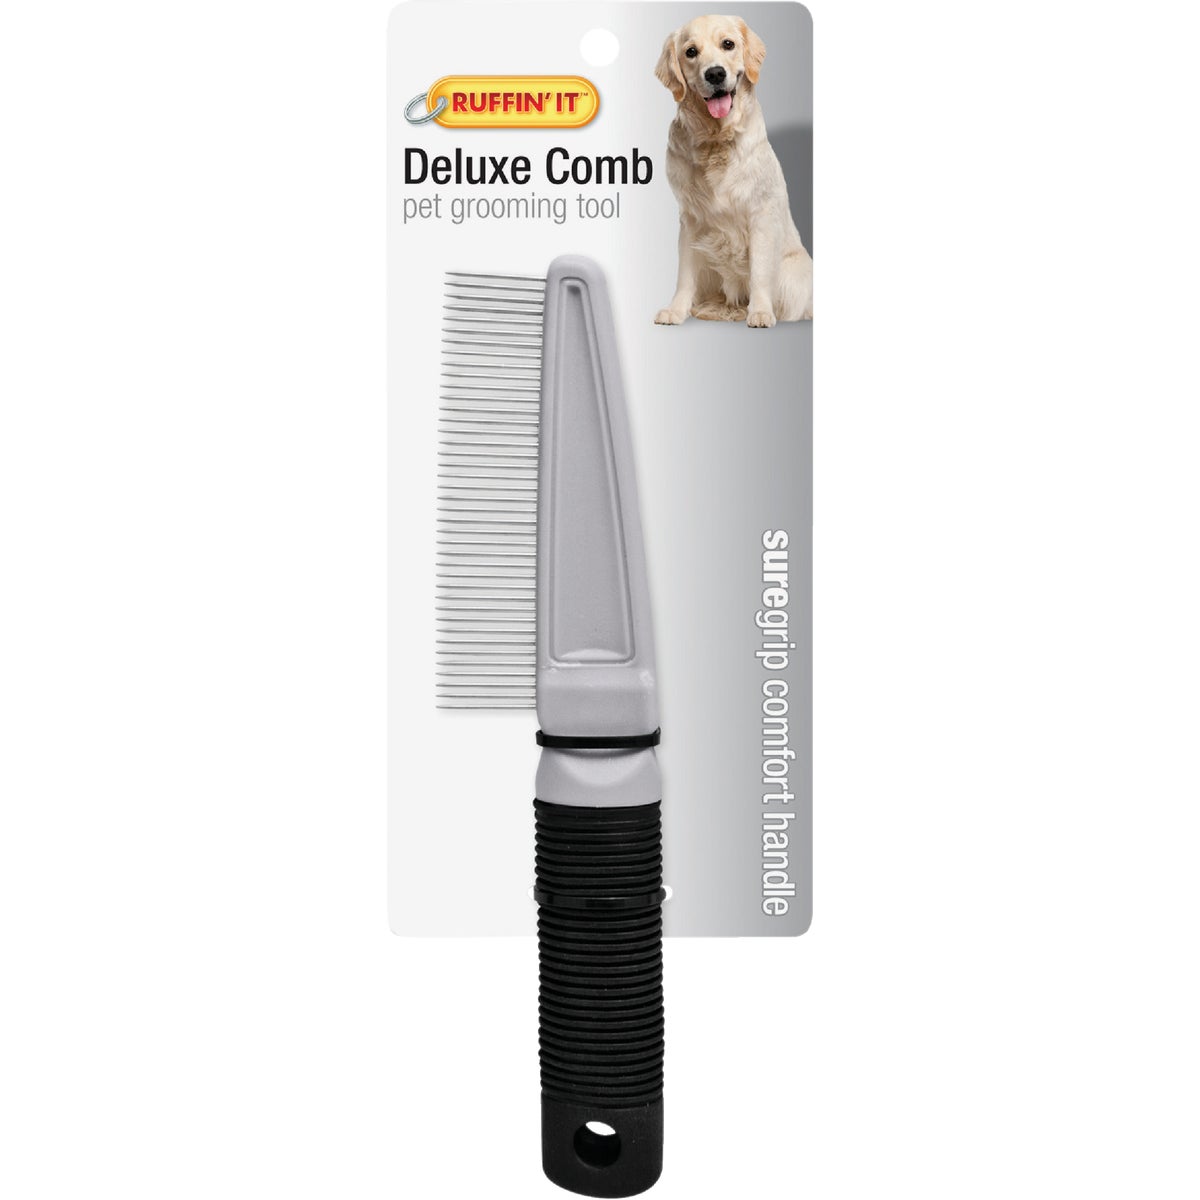 Item 810634, Deluxe comb with chrome-plated teeth.